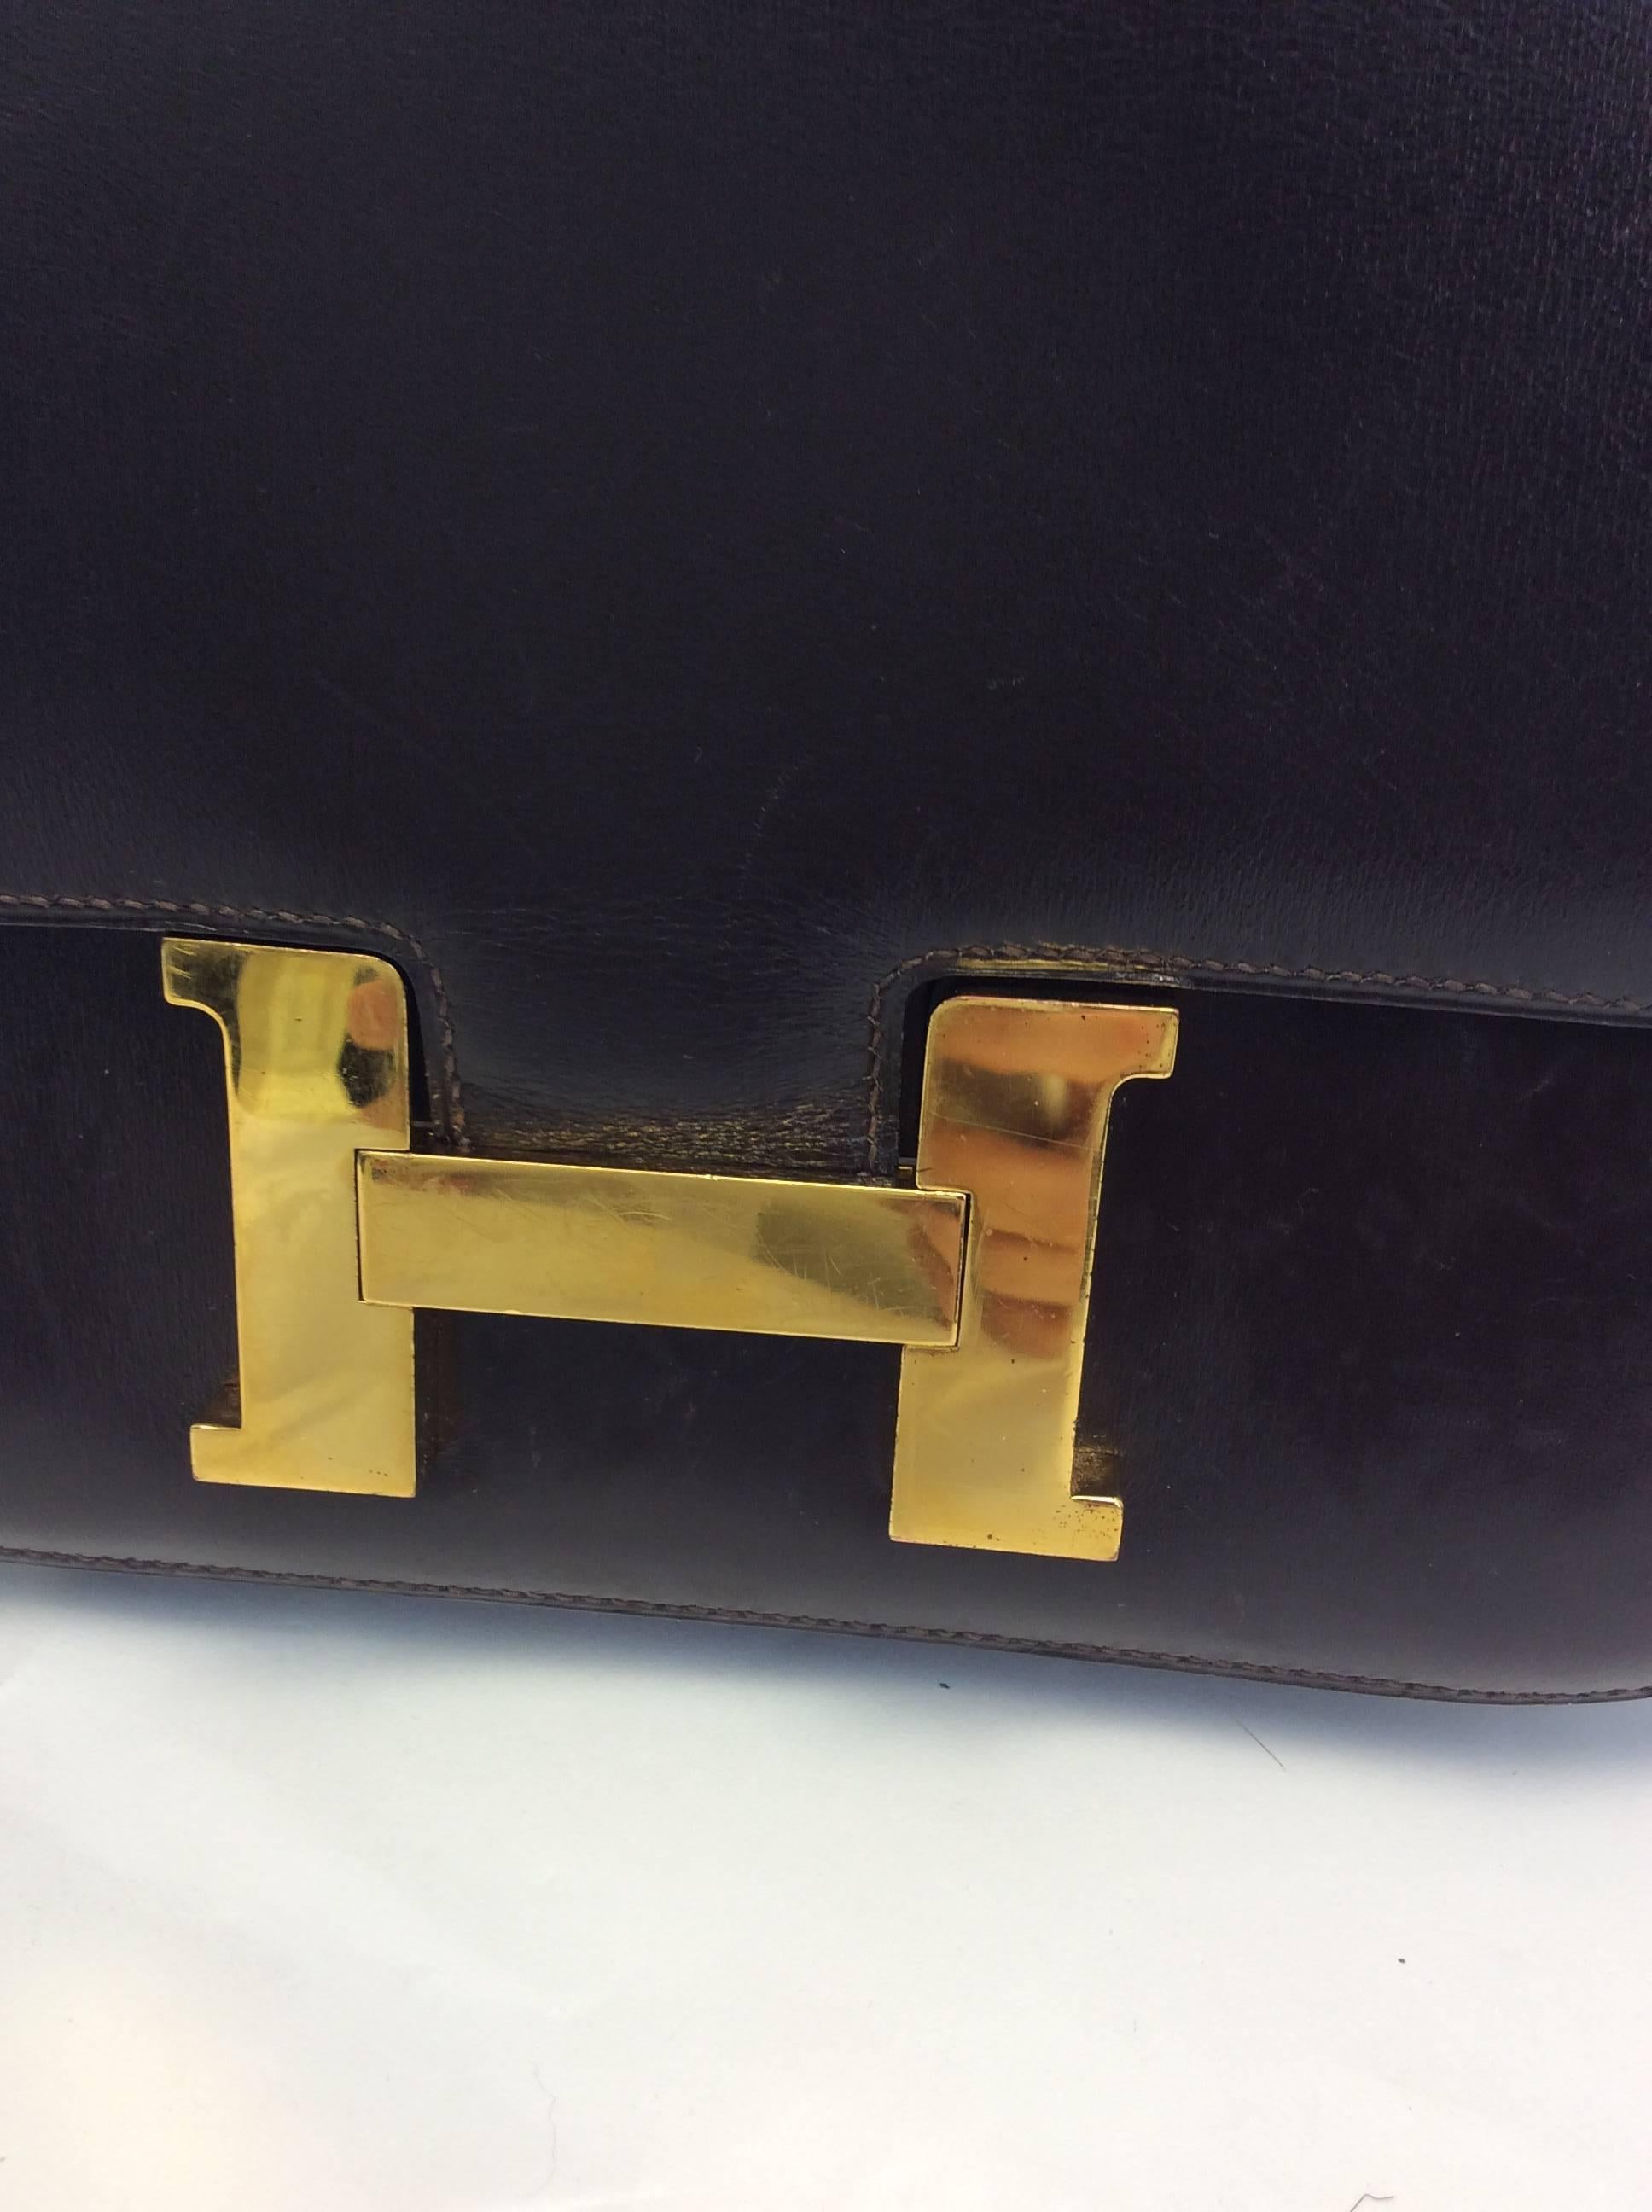 Hermes Vintage Brown Box Constance Crossbody Bag 
Chocolate brown box calf leather
Signature H logo
Snap closure on front flap
$3,300
Made in France